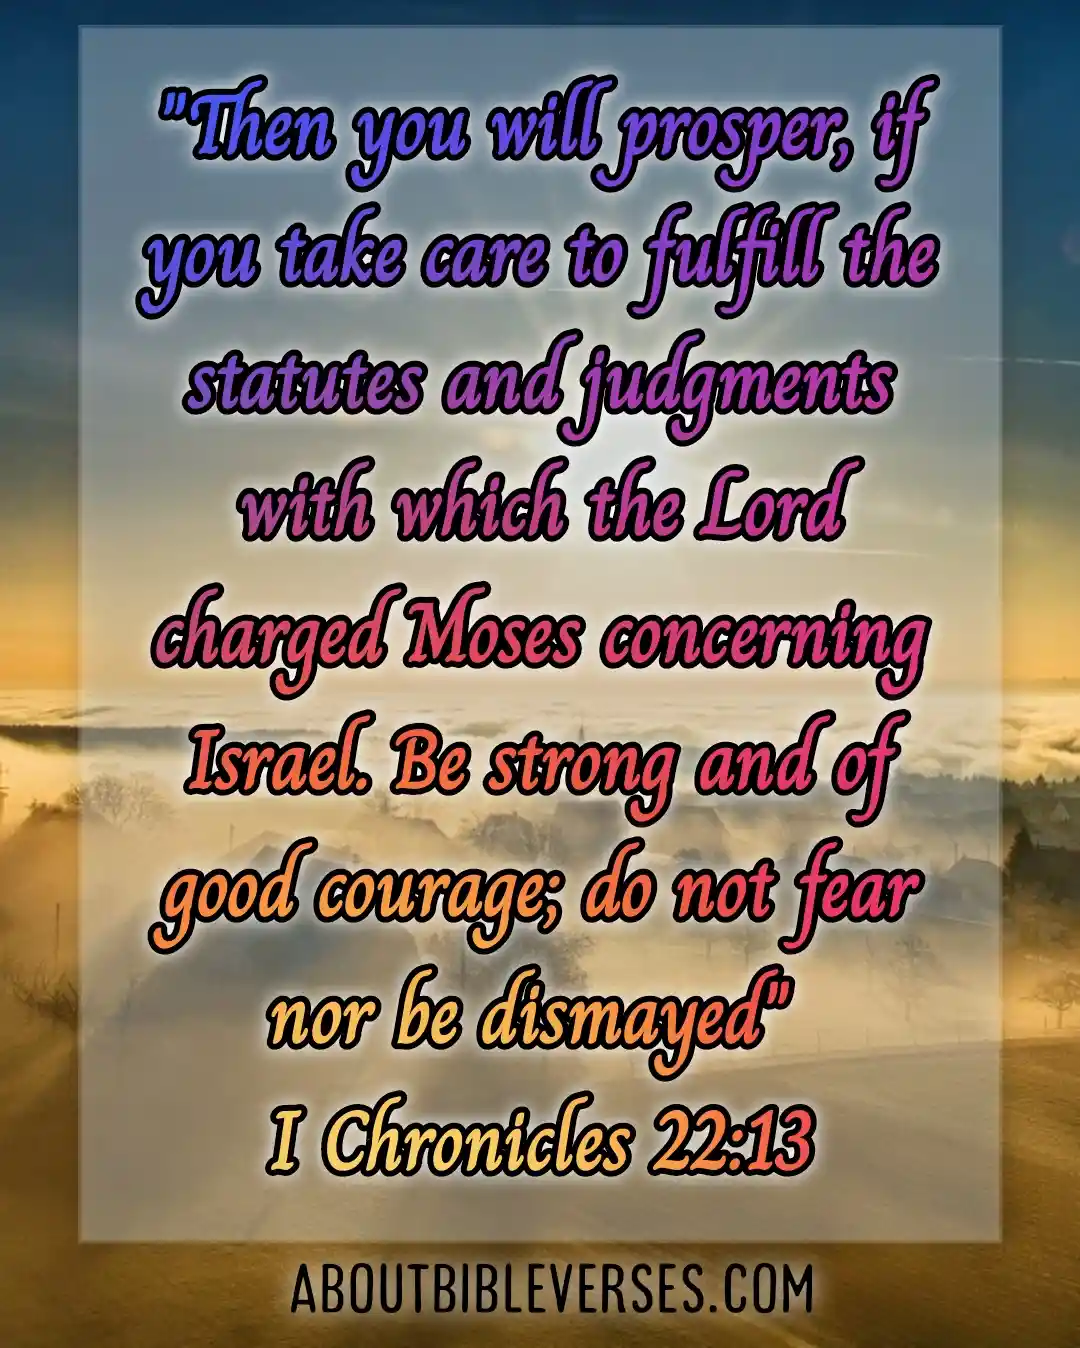 Bible Verses About Courage (1 Chronicles 22:13)